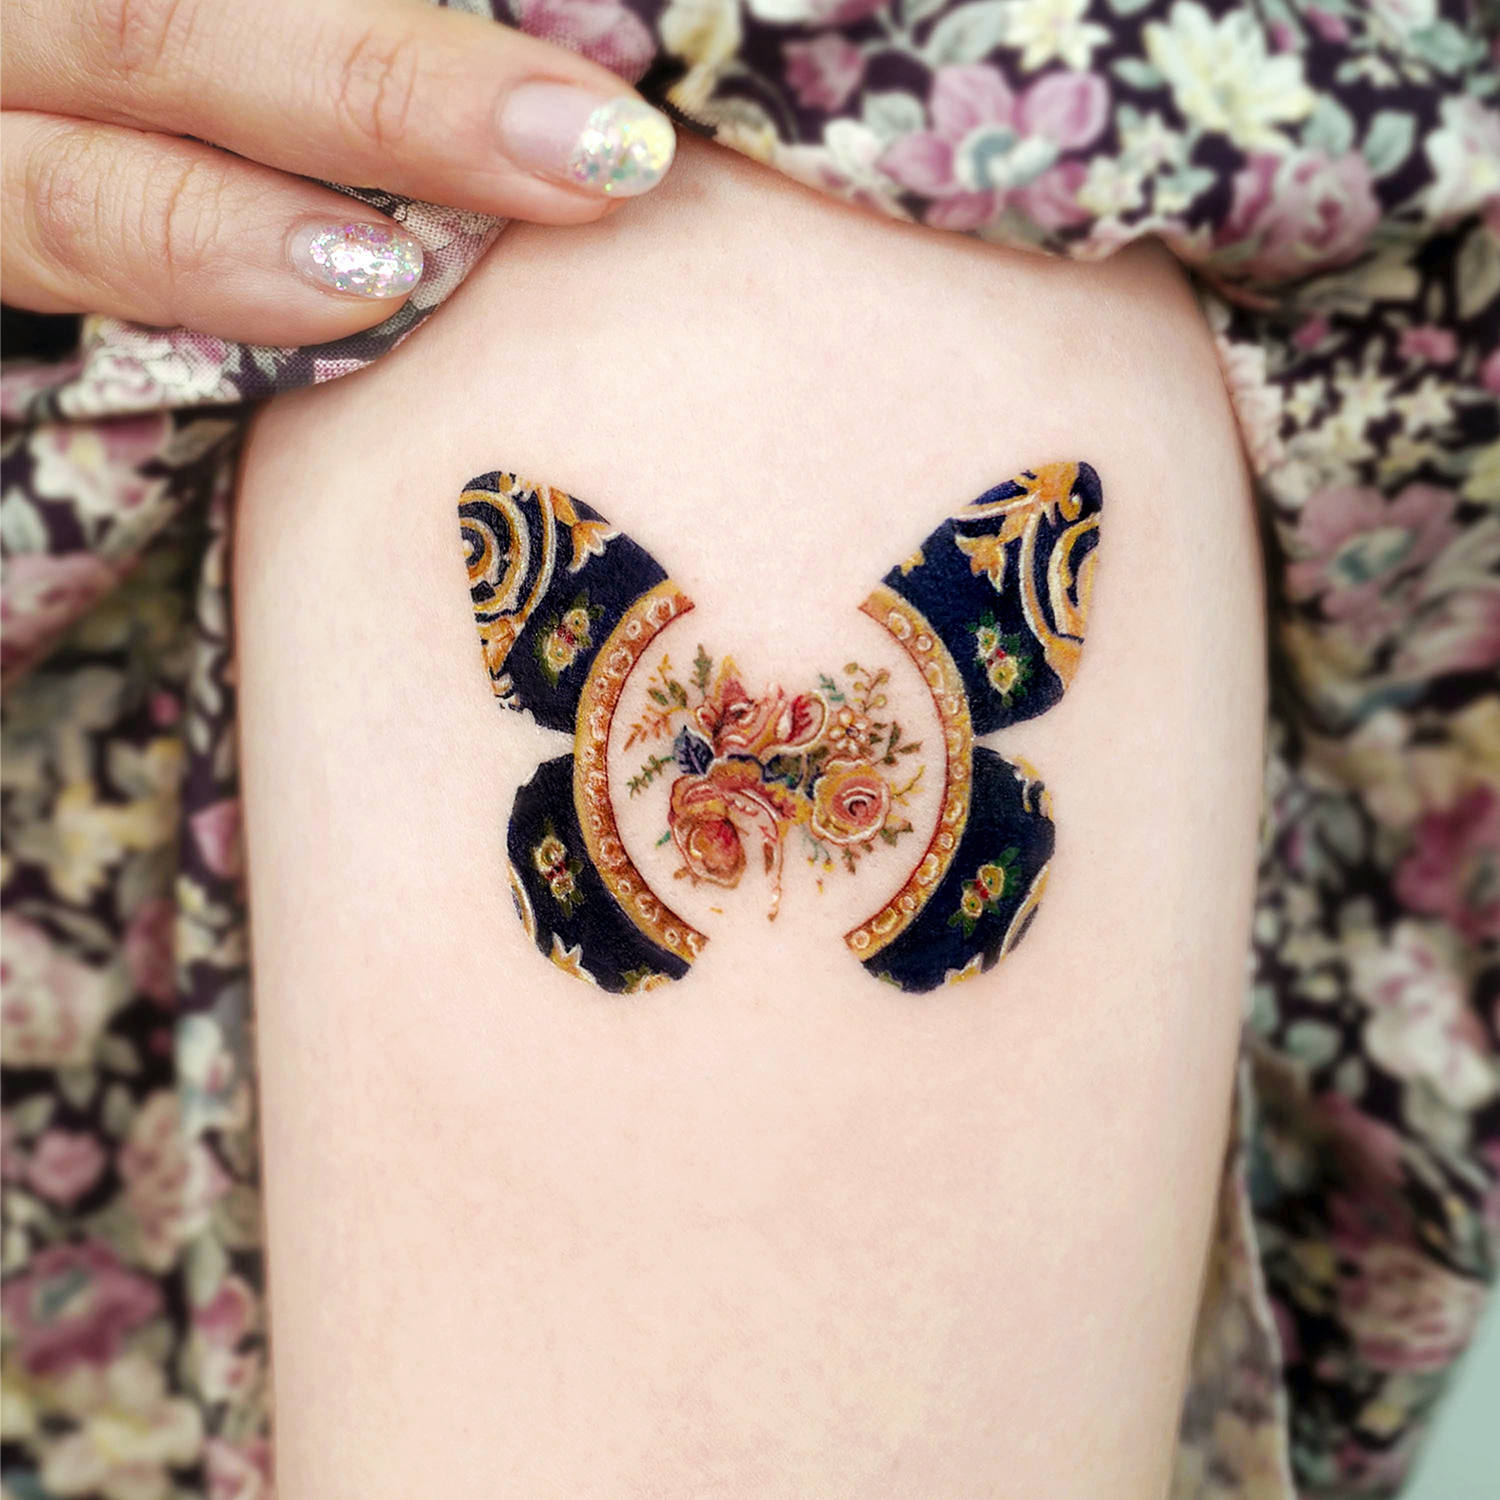 Vintage imagery inspires tattooer Songe. Butterfly and flowers.